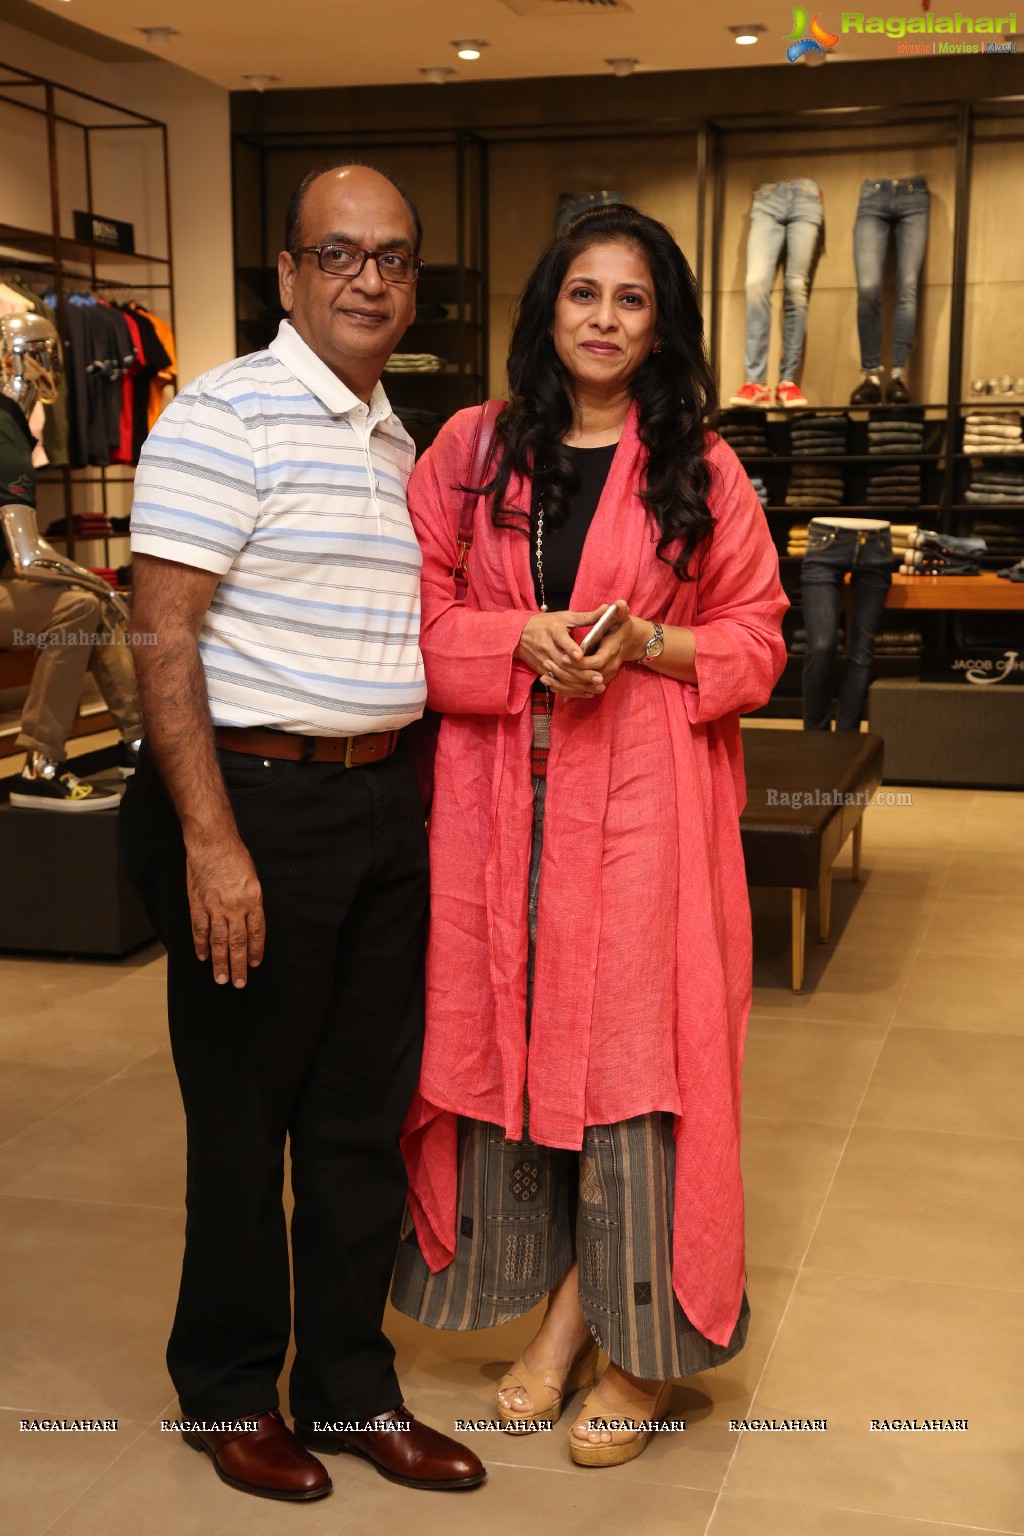 Grand Launch of The Collective, Banjara Hills